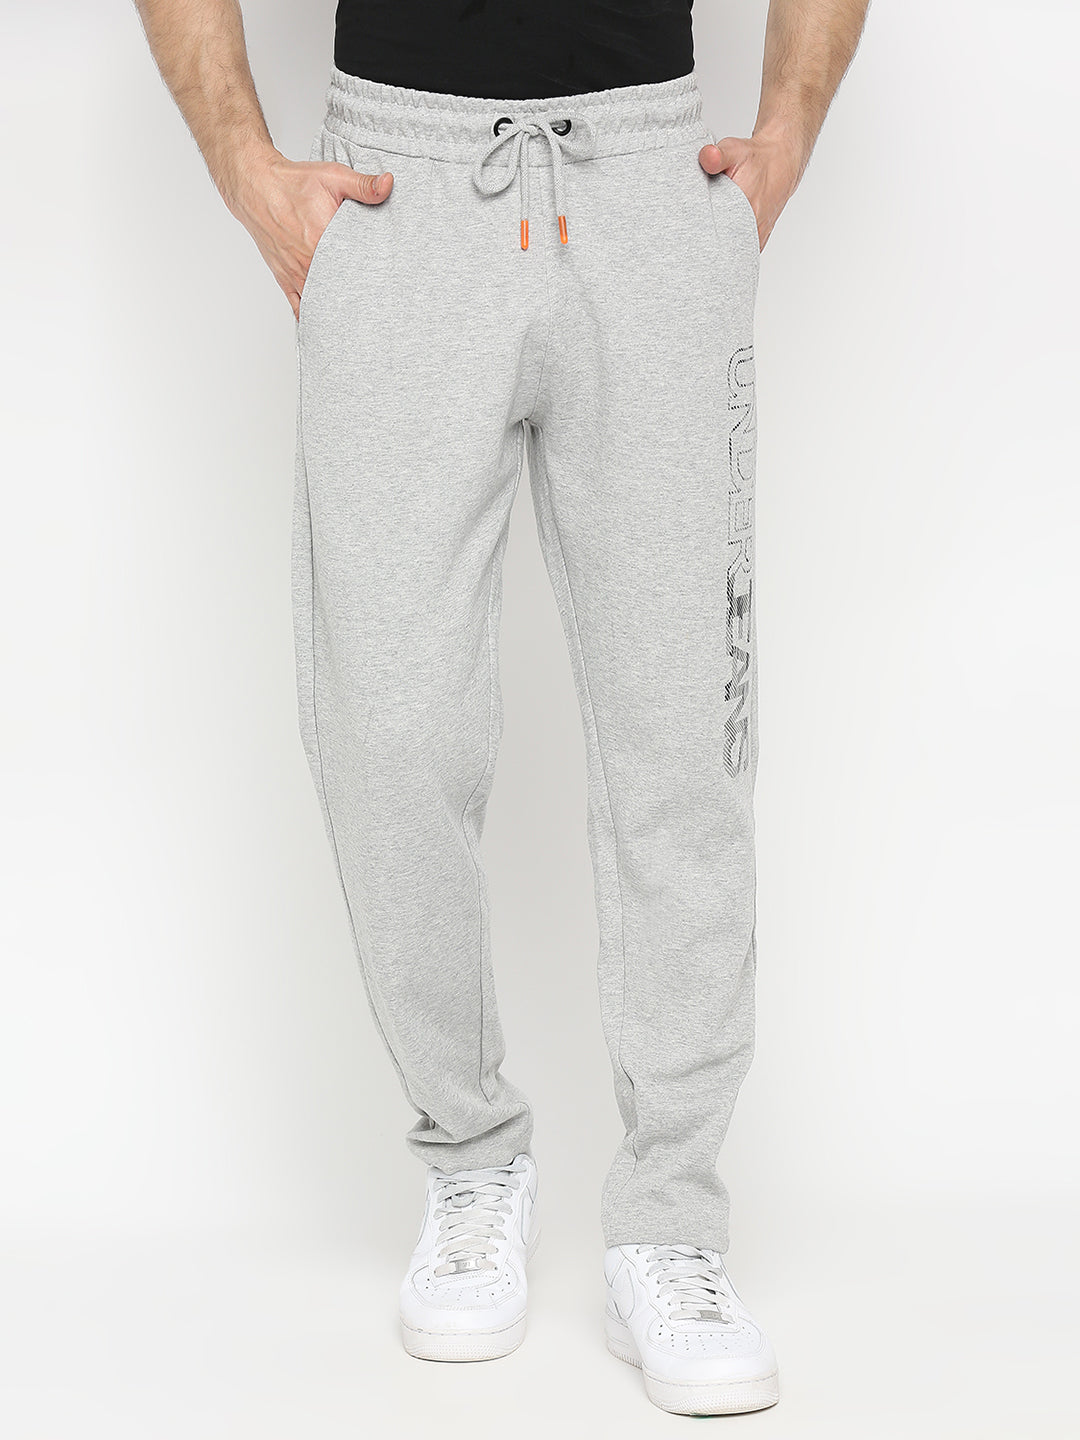 Men Cotton Blend Knitted Grey Trackpant - Underjeans by Spykar